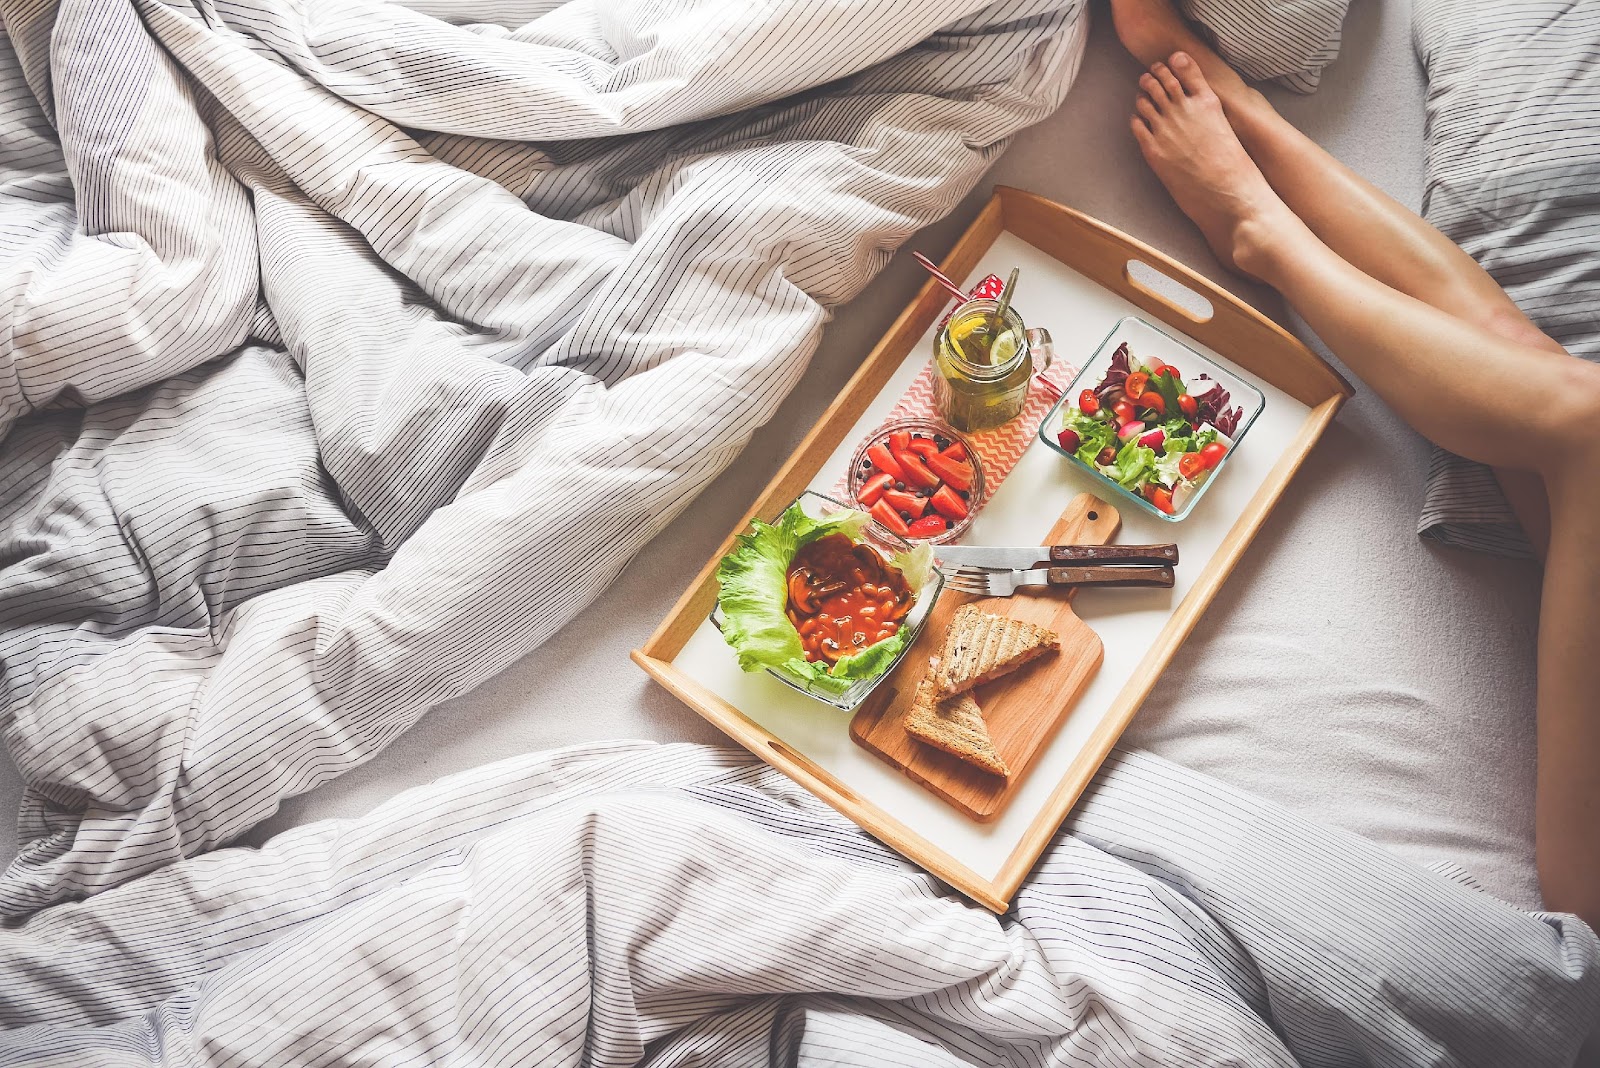 A TRAY OF FOOD ON A BED WITH A WOMEN PAIR OF LEGS 
rest is important for varicose veins